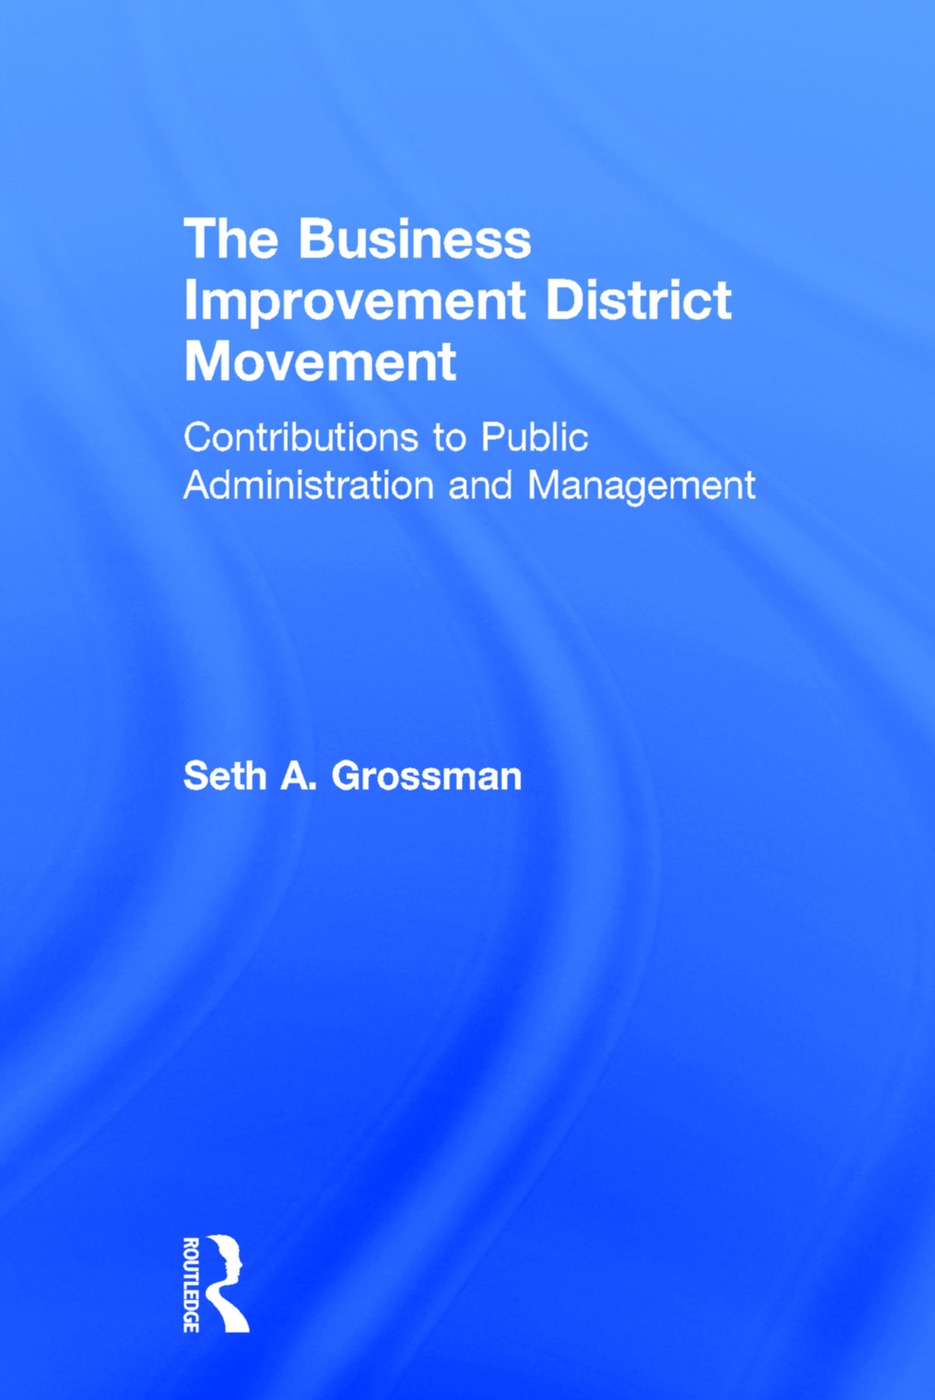 The Business Improvement District Movement: Contributions to Public Administration and Management